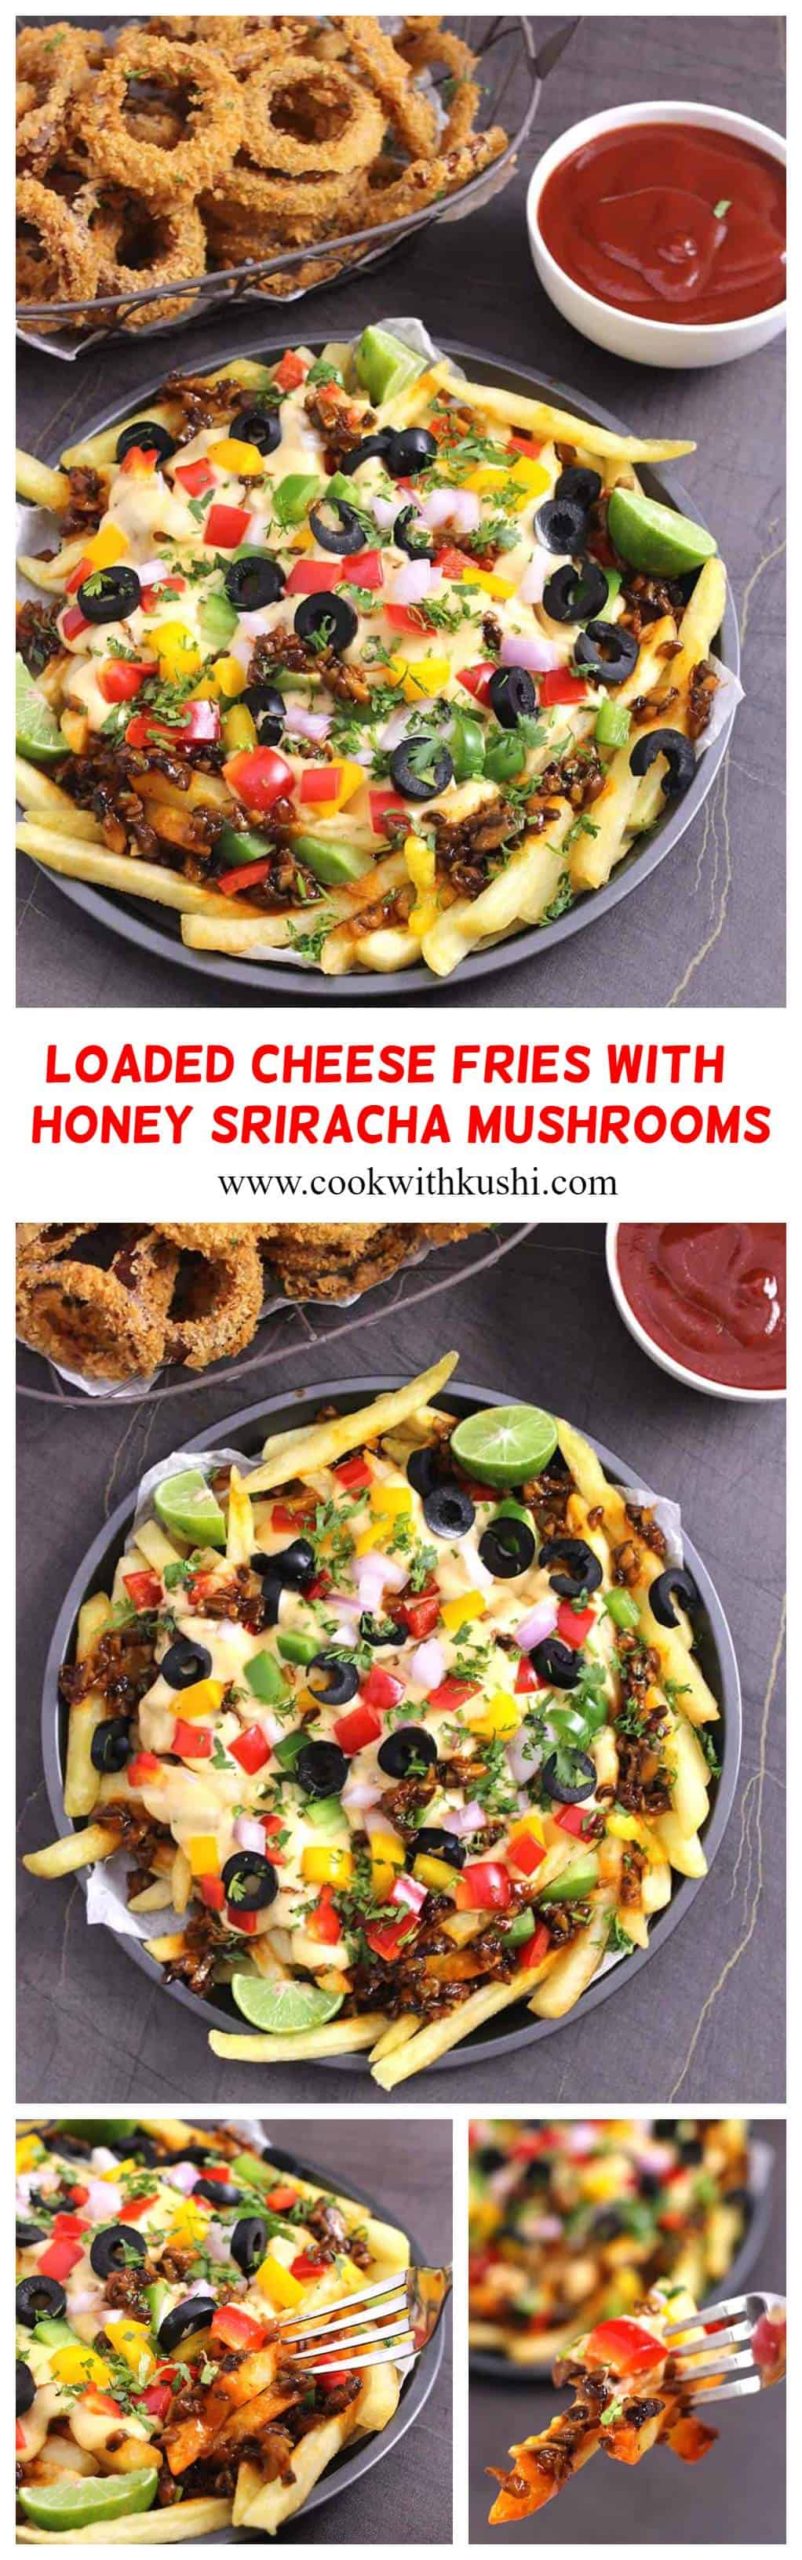 Loaded cheese fries or French fries are easy to make, finger licking good, total crowd pleaser appetizer or snack#vegetarianloadedfries #meatlessrecipes #appetizers #snacks #fingerfood #partyfood #superbowl #gamenight #marchmadness #footballfood #cheesefries #loadedfries #frenchfries #beer #nachosfries #cheesesauceforfries #fries #mushrooms #potatoes #bacon #pork 